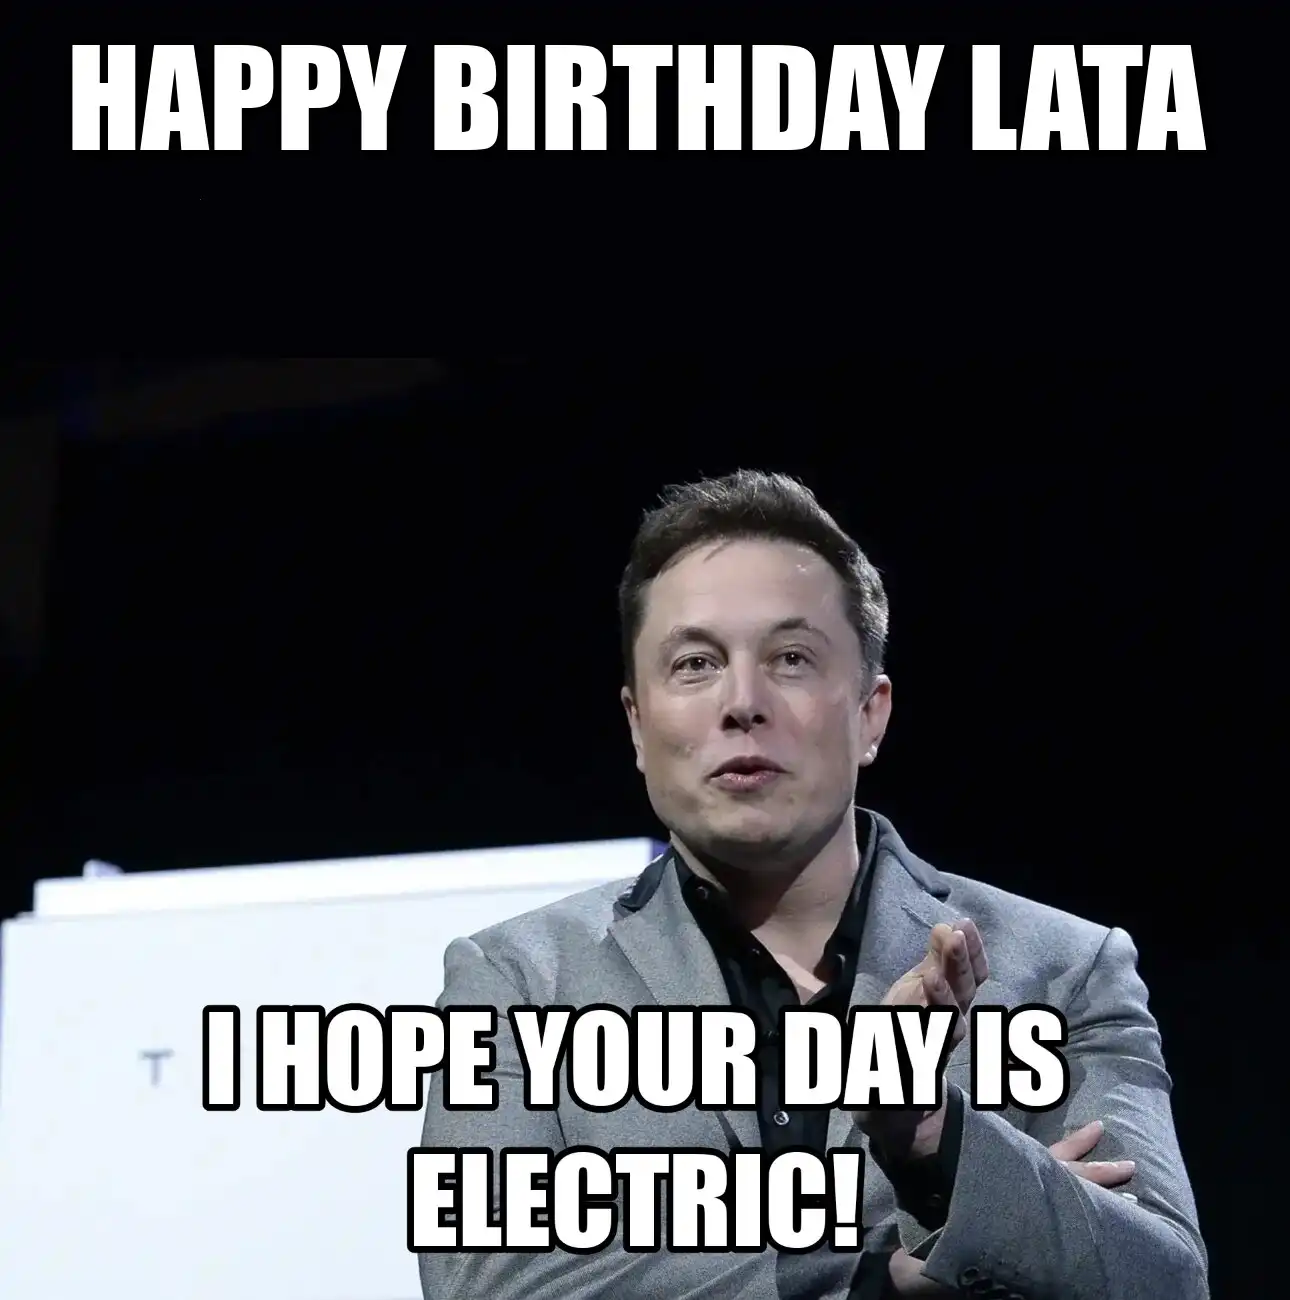 Happy Birthday Lata I Hope Your Day Is Electric Meme